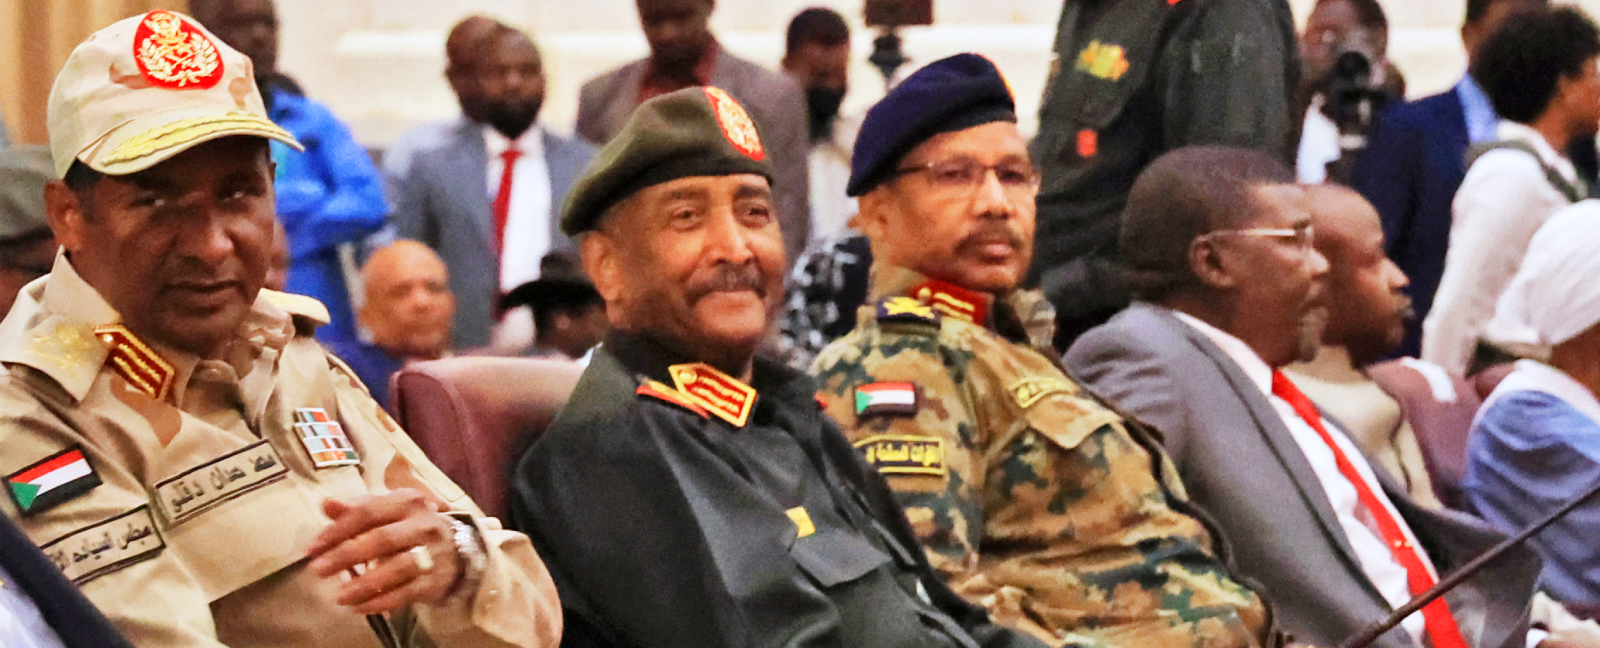 Escalating Tensions within Sudan’s Military Government